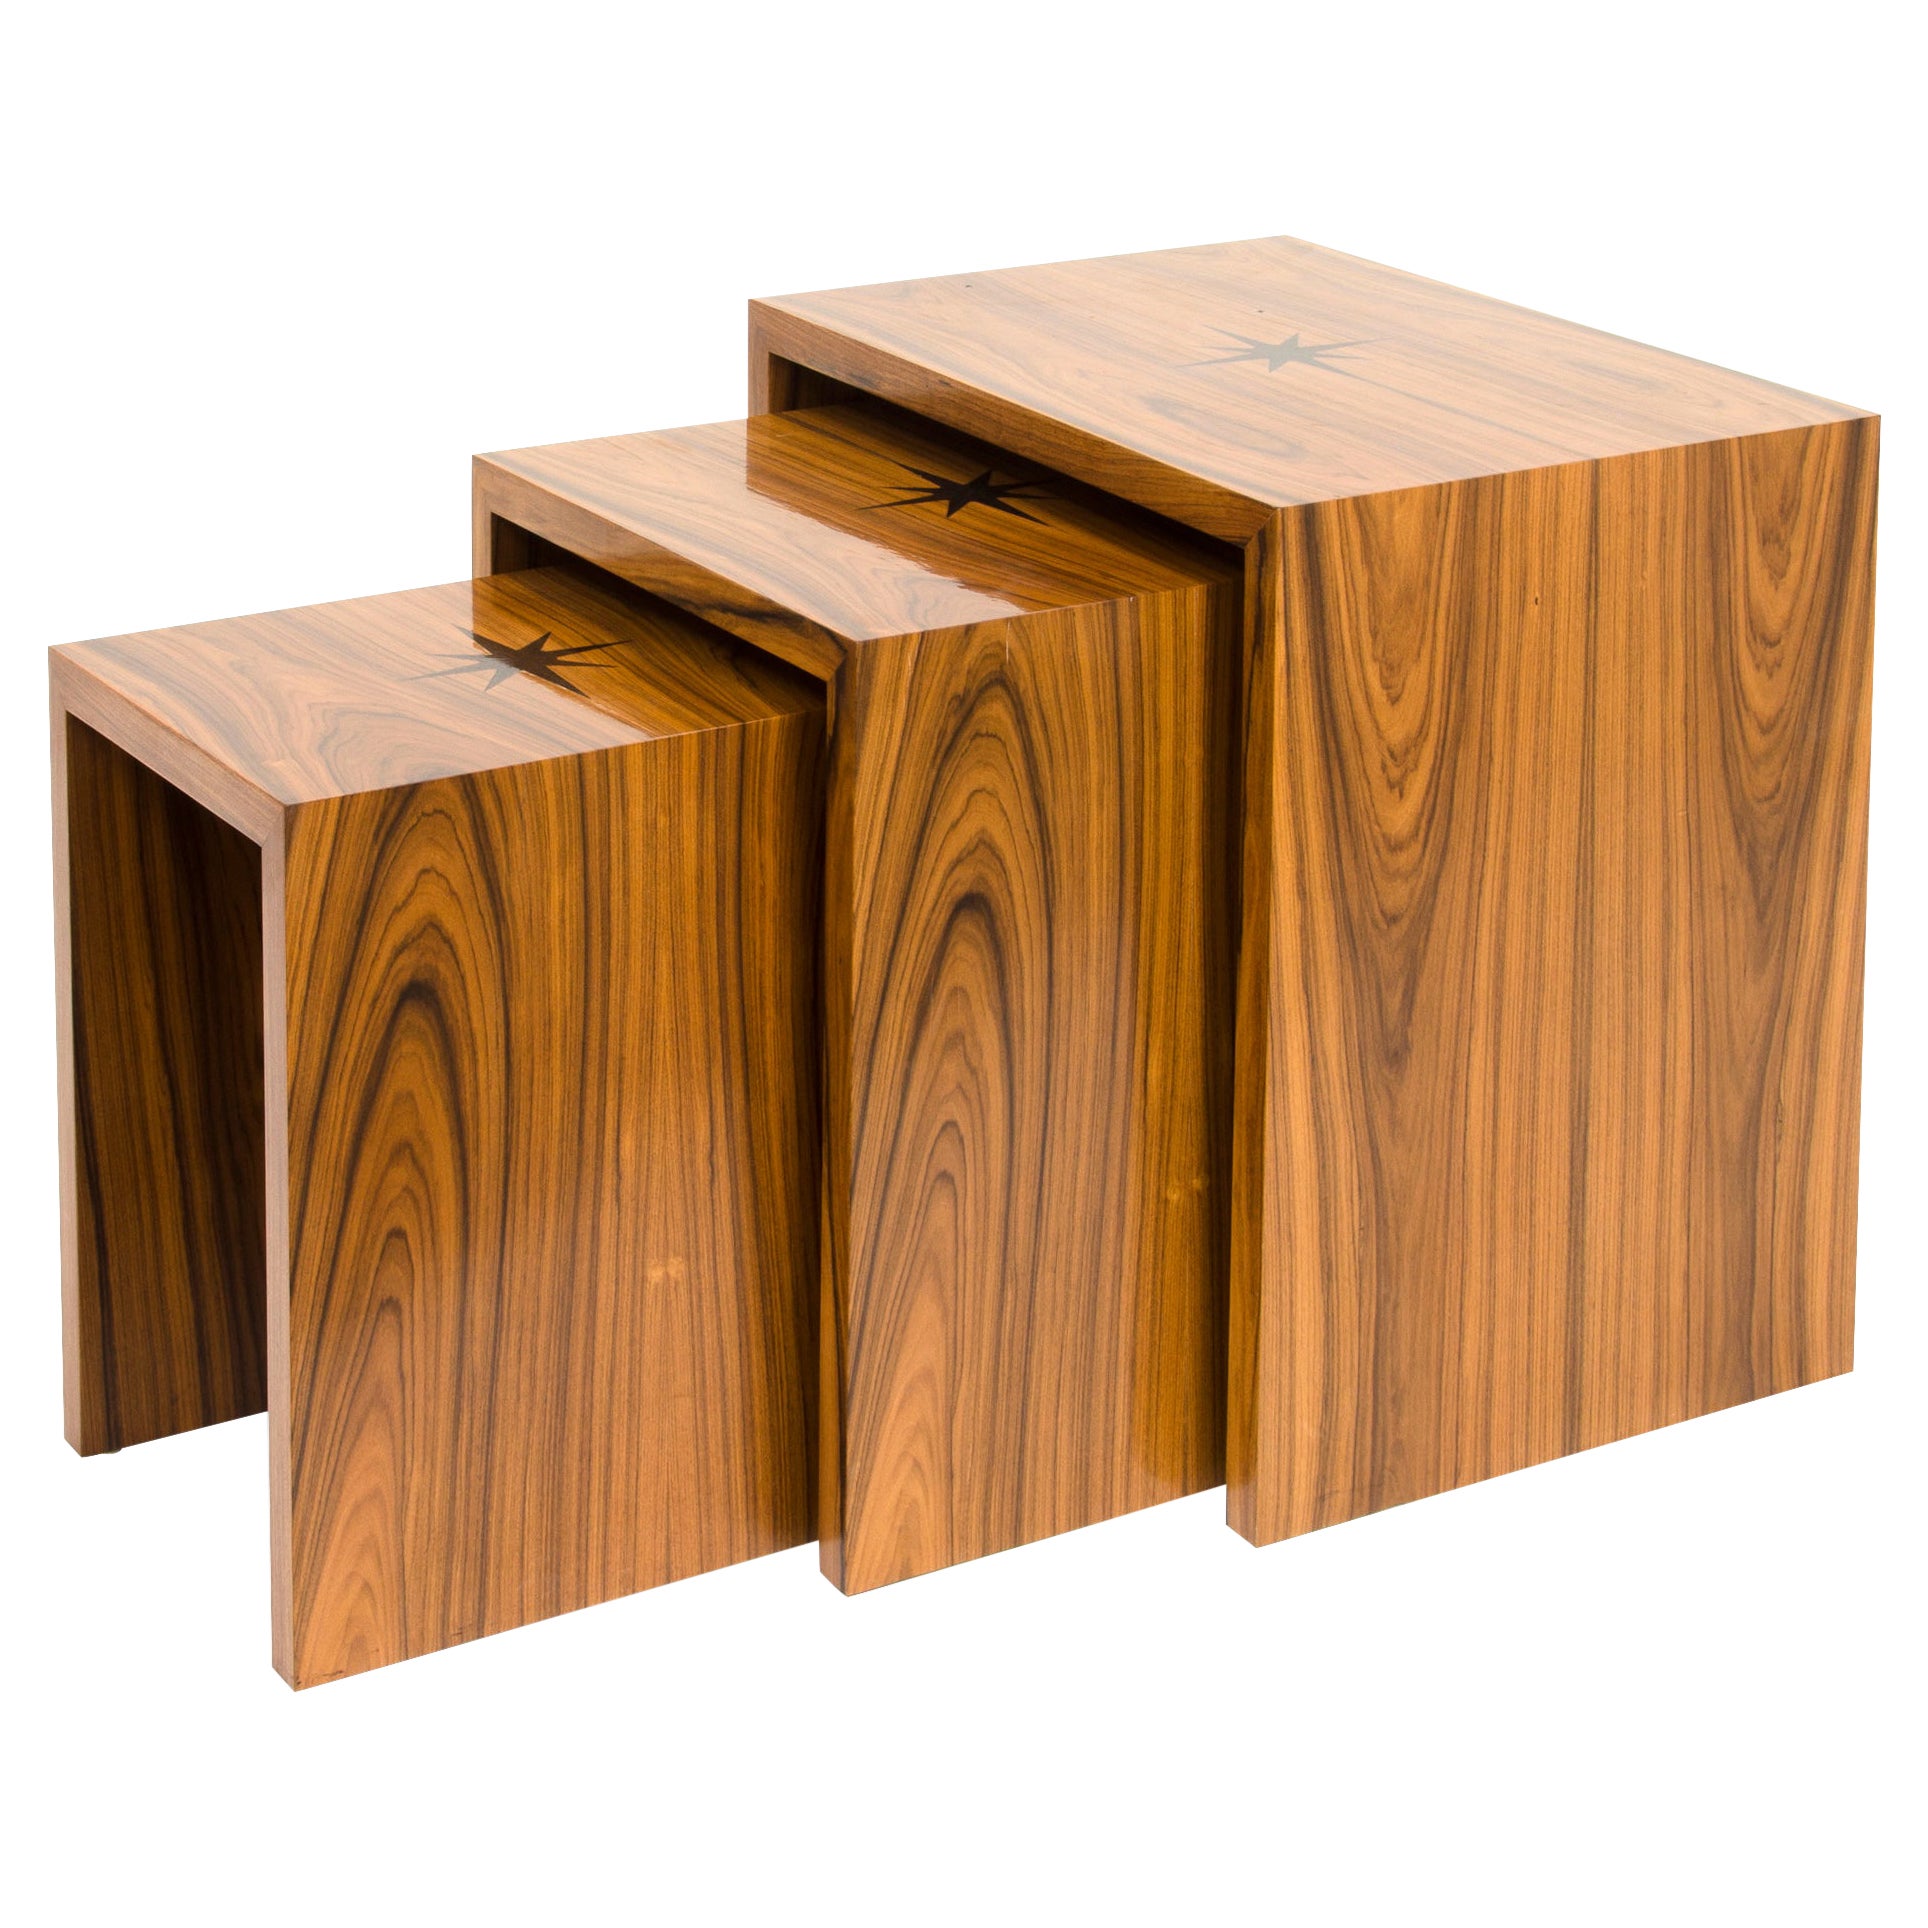 Rosewood Nesting Tables with Star inlay